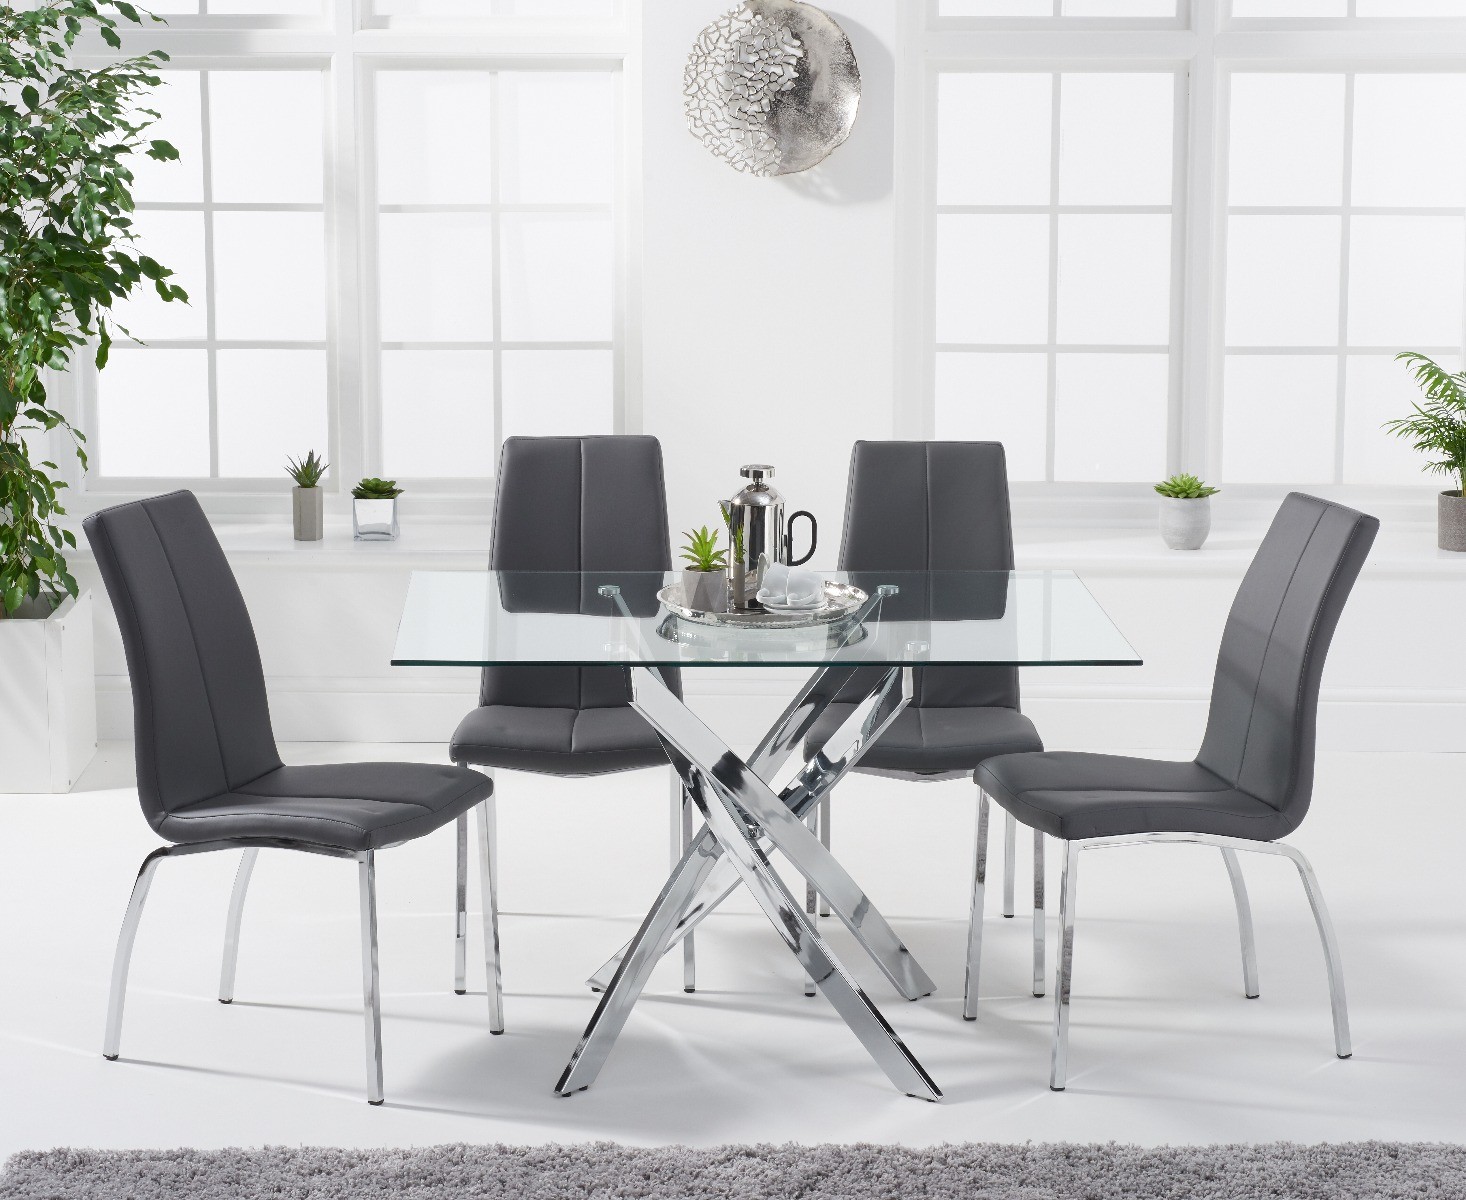 Denver 120cm Rectangular Glass Dining Table With 6 Black Marco Chairs